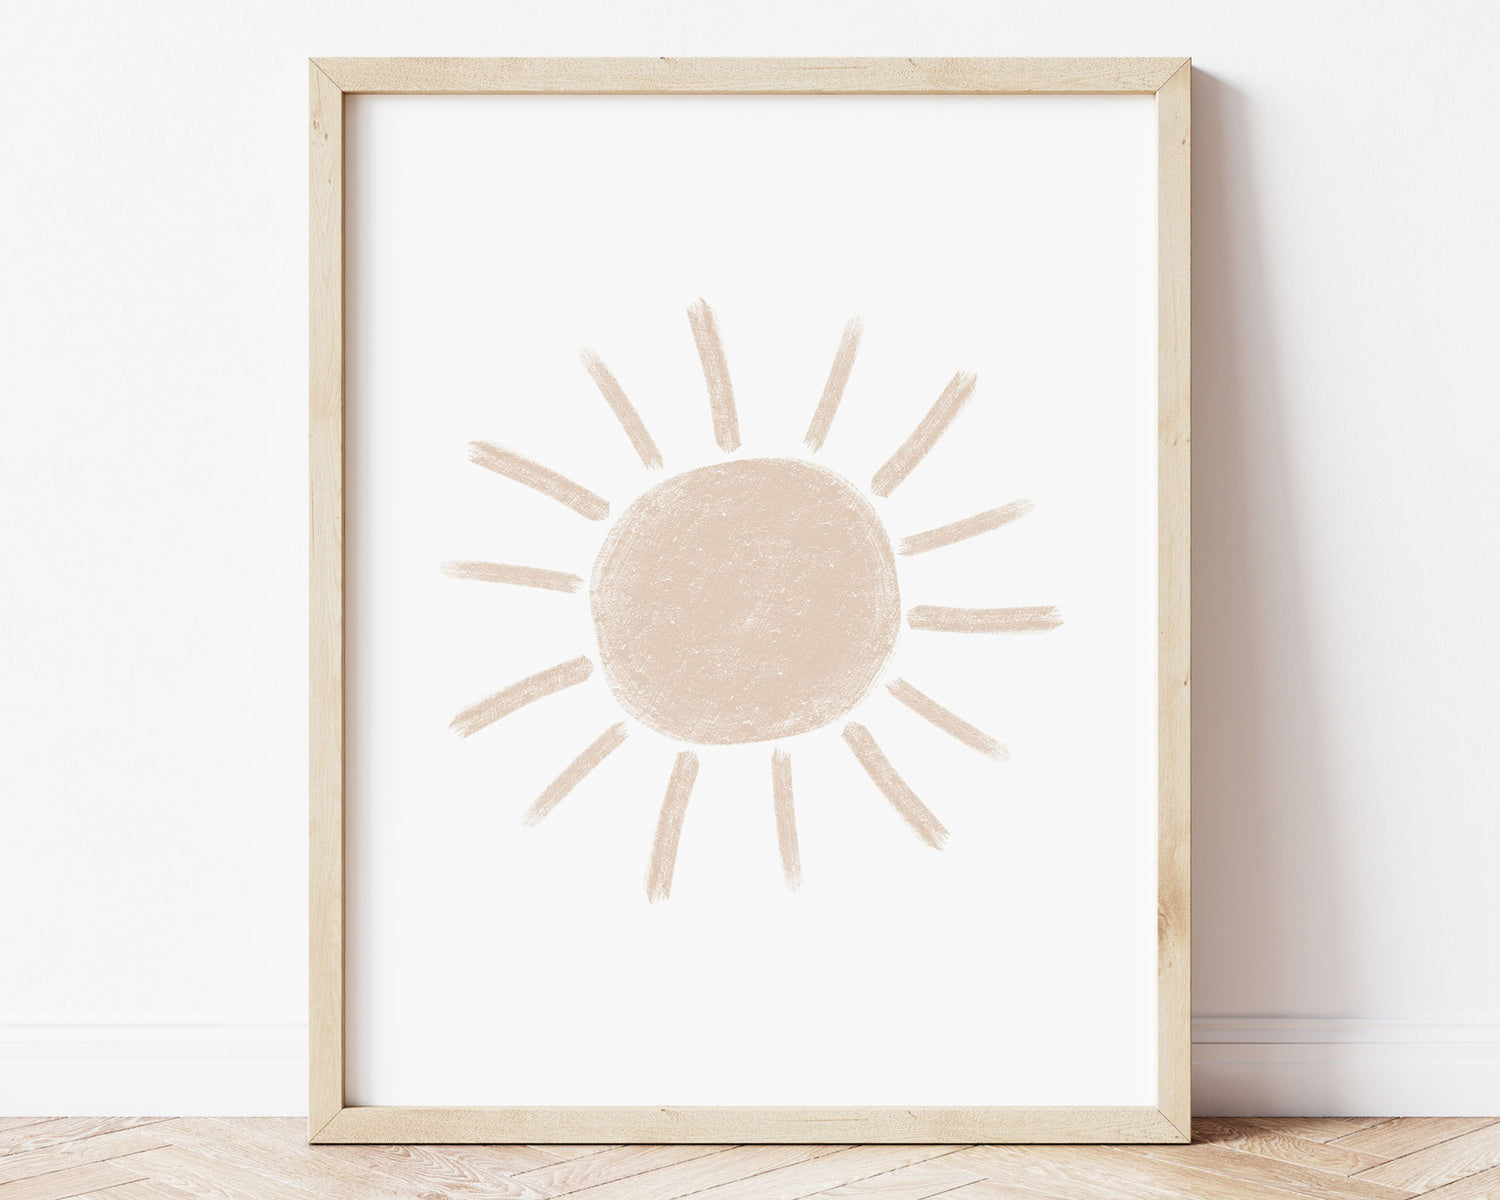 Neutral beige abstract sun in chalky brushstroke illlustration style perfect for Baby Nursery Décor, Little Boys Bedroom Wall Art, Toddler Girls Room Wall Hangings, Kiddos Bathroom Wall Art and Childrens Playroom Décor.